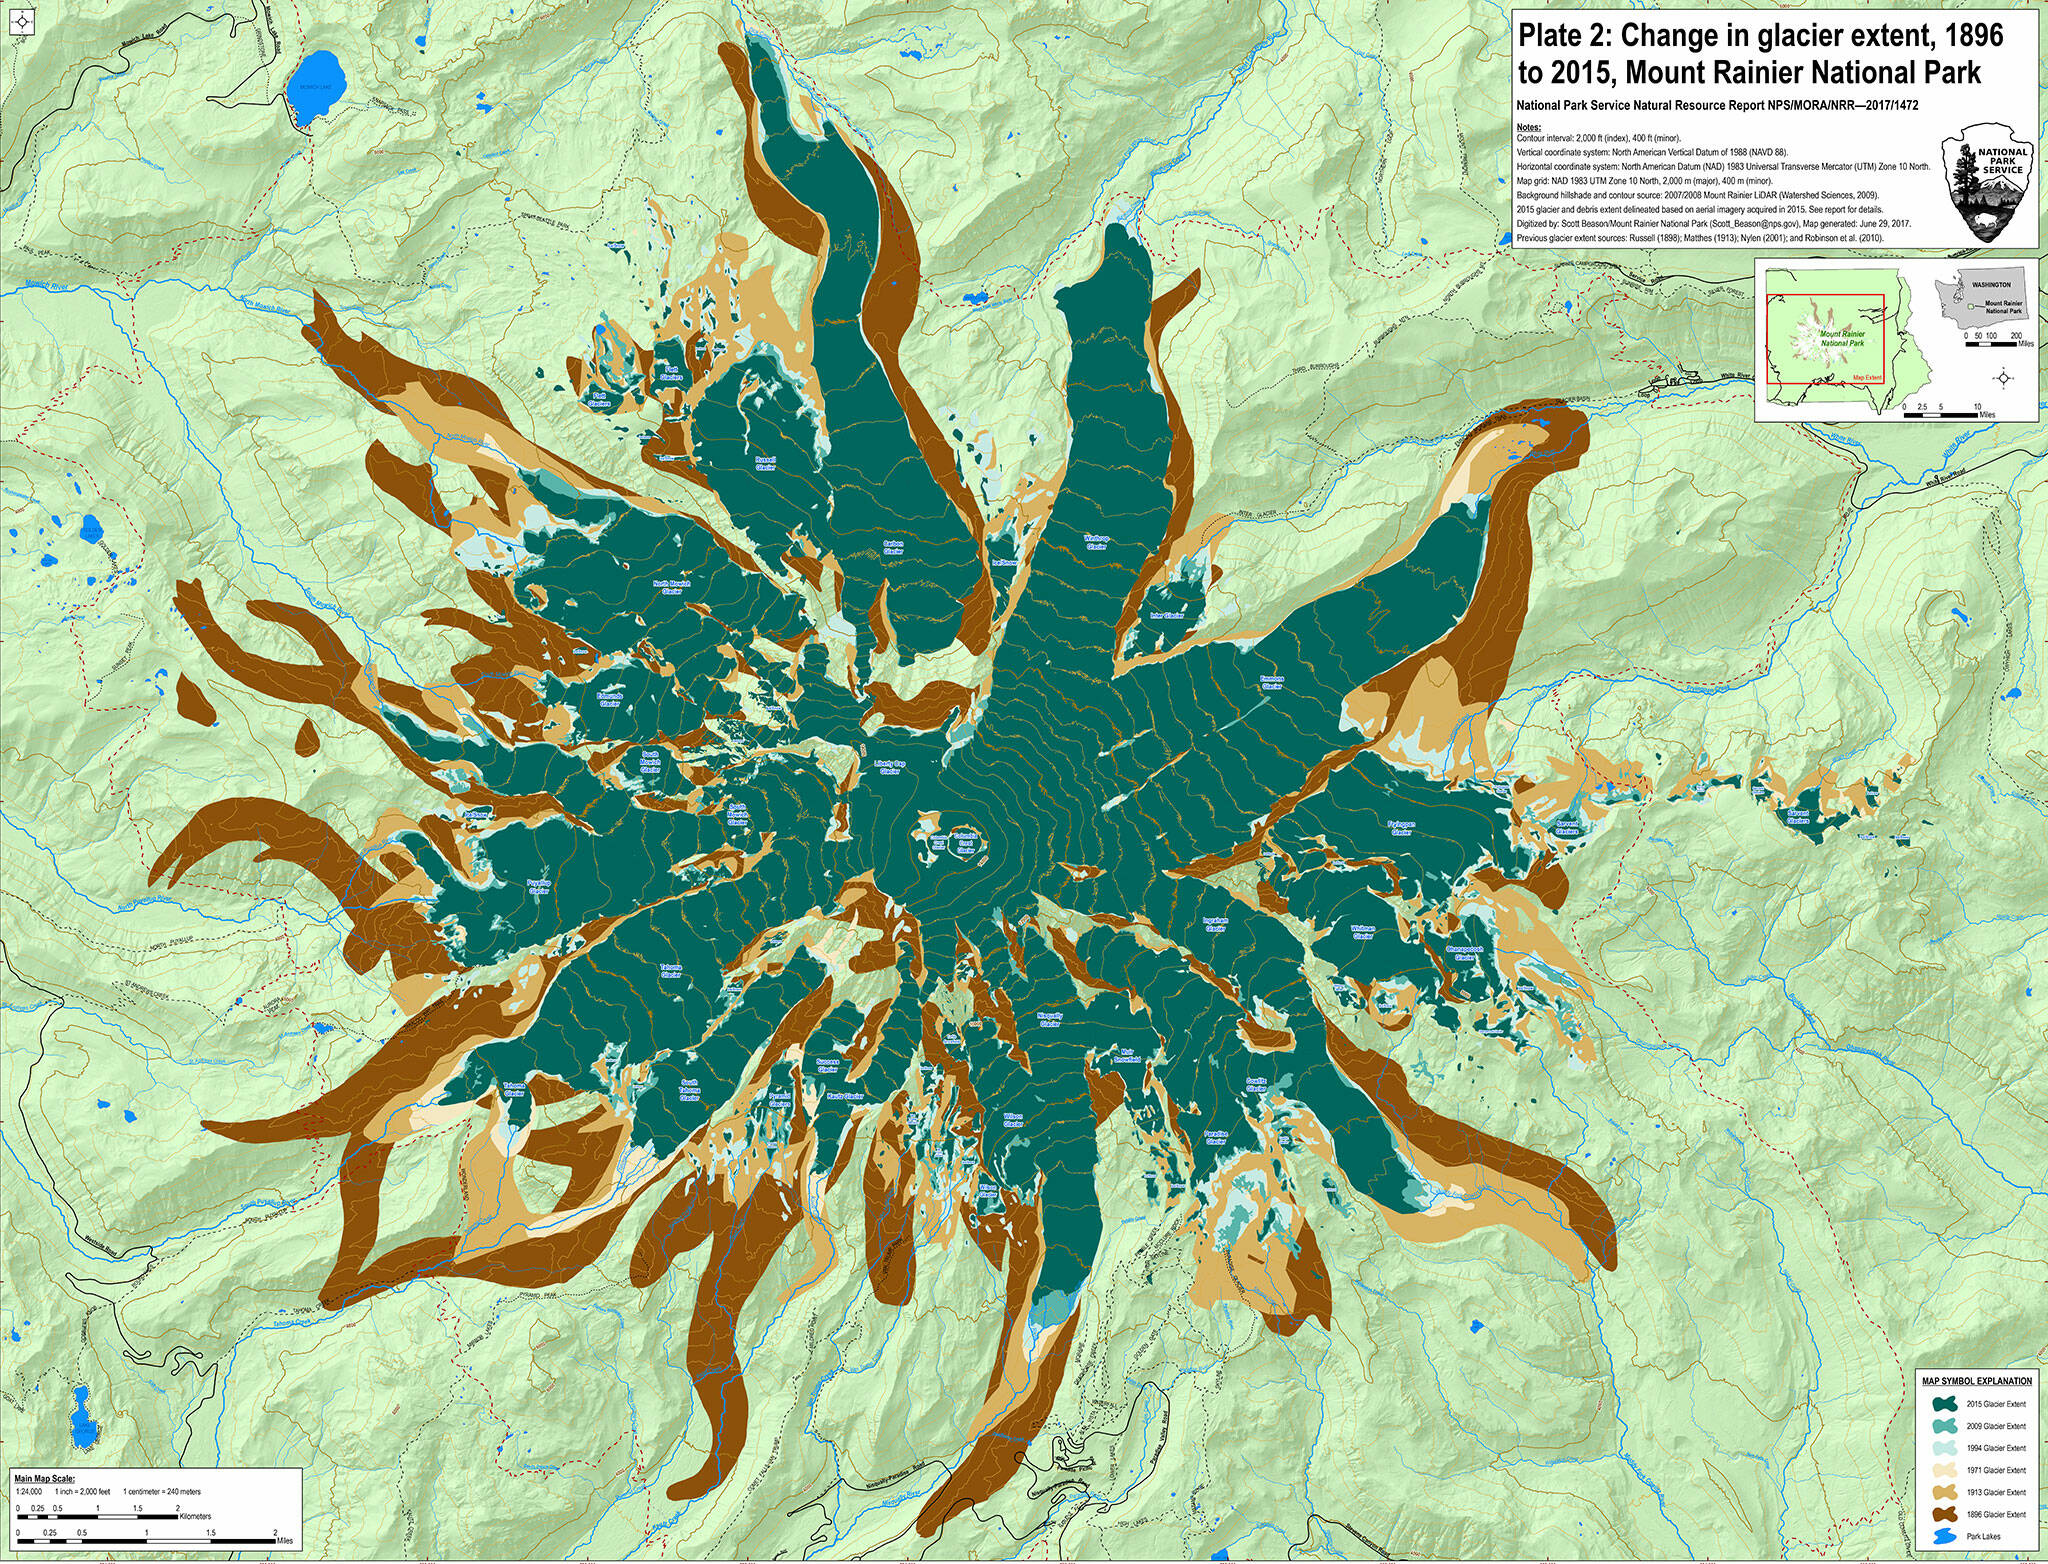 This map, created by Mount Rainier researchers, shows the extent of glacial retreat at Mount Rainier since 1896 (in brown), 1913 (in tan), 1971 (in cream), 1994 (in light blue), 2009 (in teal), and in 2015 (in navy.) A more detailed version of this map, with additional notes, is available at https://www.morageology.com/pubs/86.pdf.